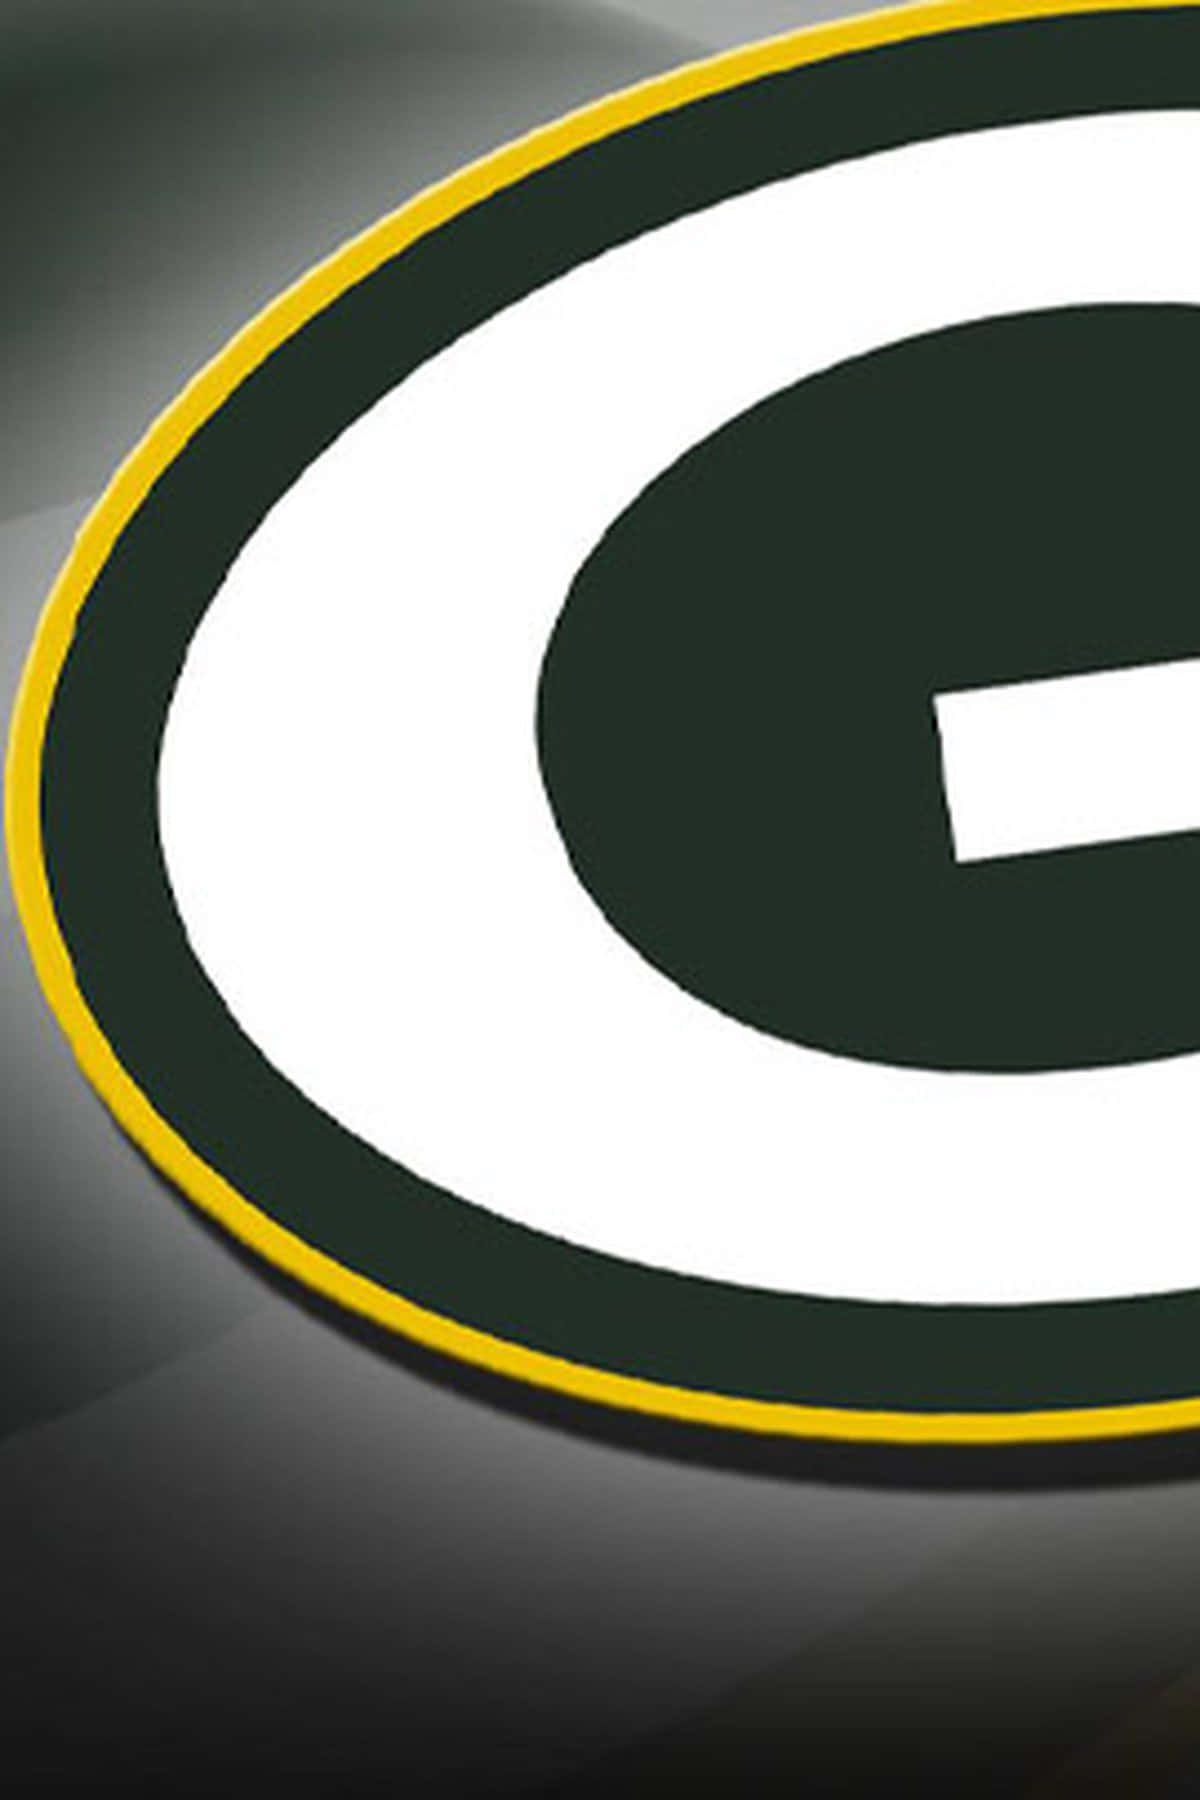 Green Bay Packers Logo on Gradient Background